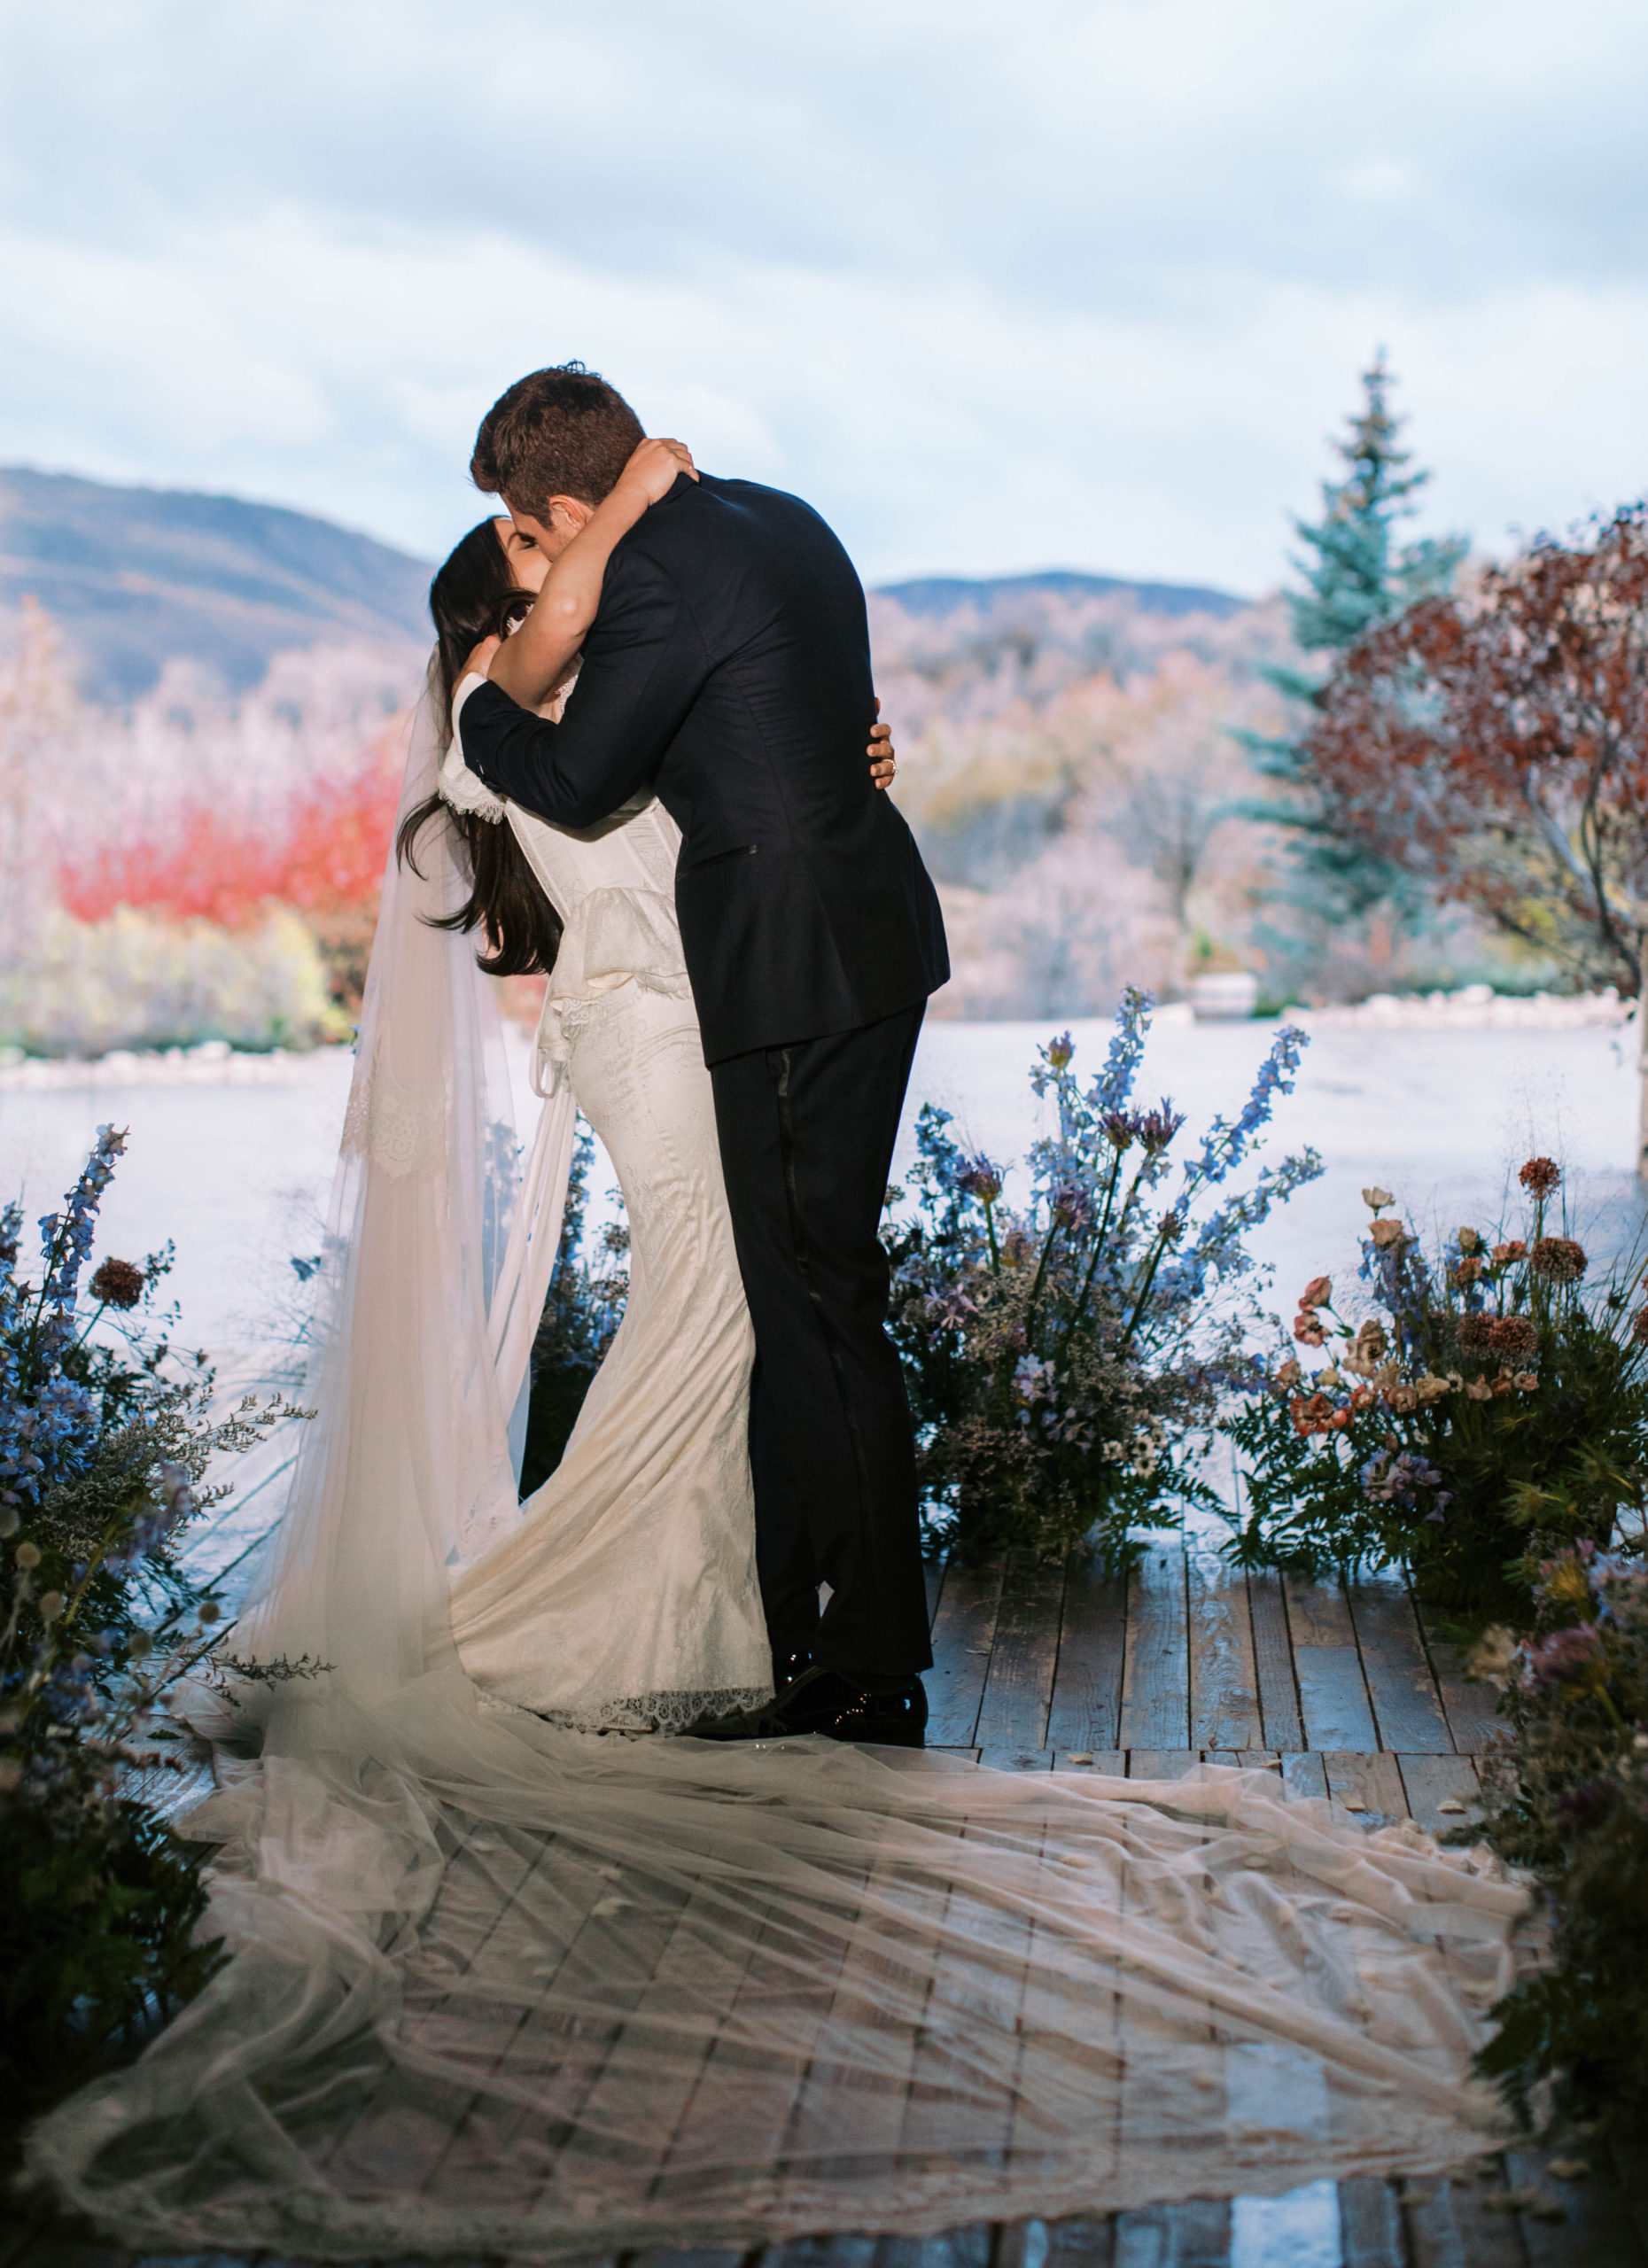 the bride and groom kiss at their wedding ceremony with mountains in the background at their blue sky ranch destination wedding in utah. photo taken by megan robinson photography